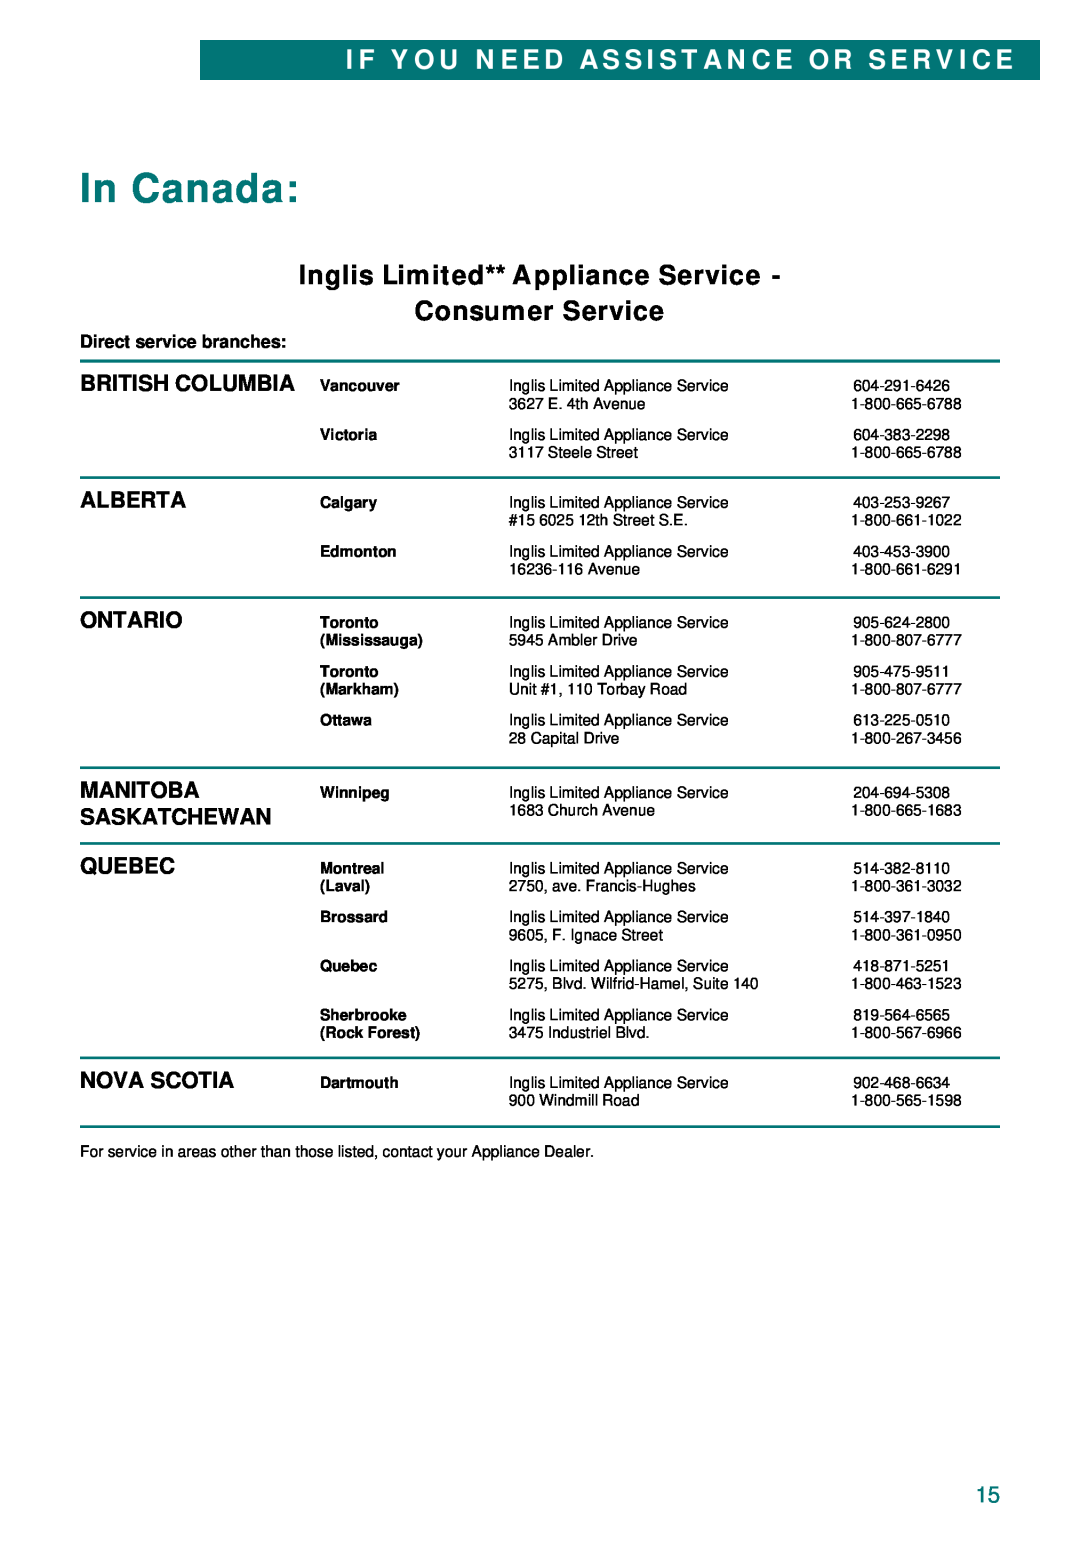 Whirlpool IBC430, WBC430 In Canada, Inglis Limited** Appliance Service Consumer Service, If You Need Assistance Or Service 